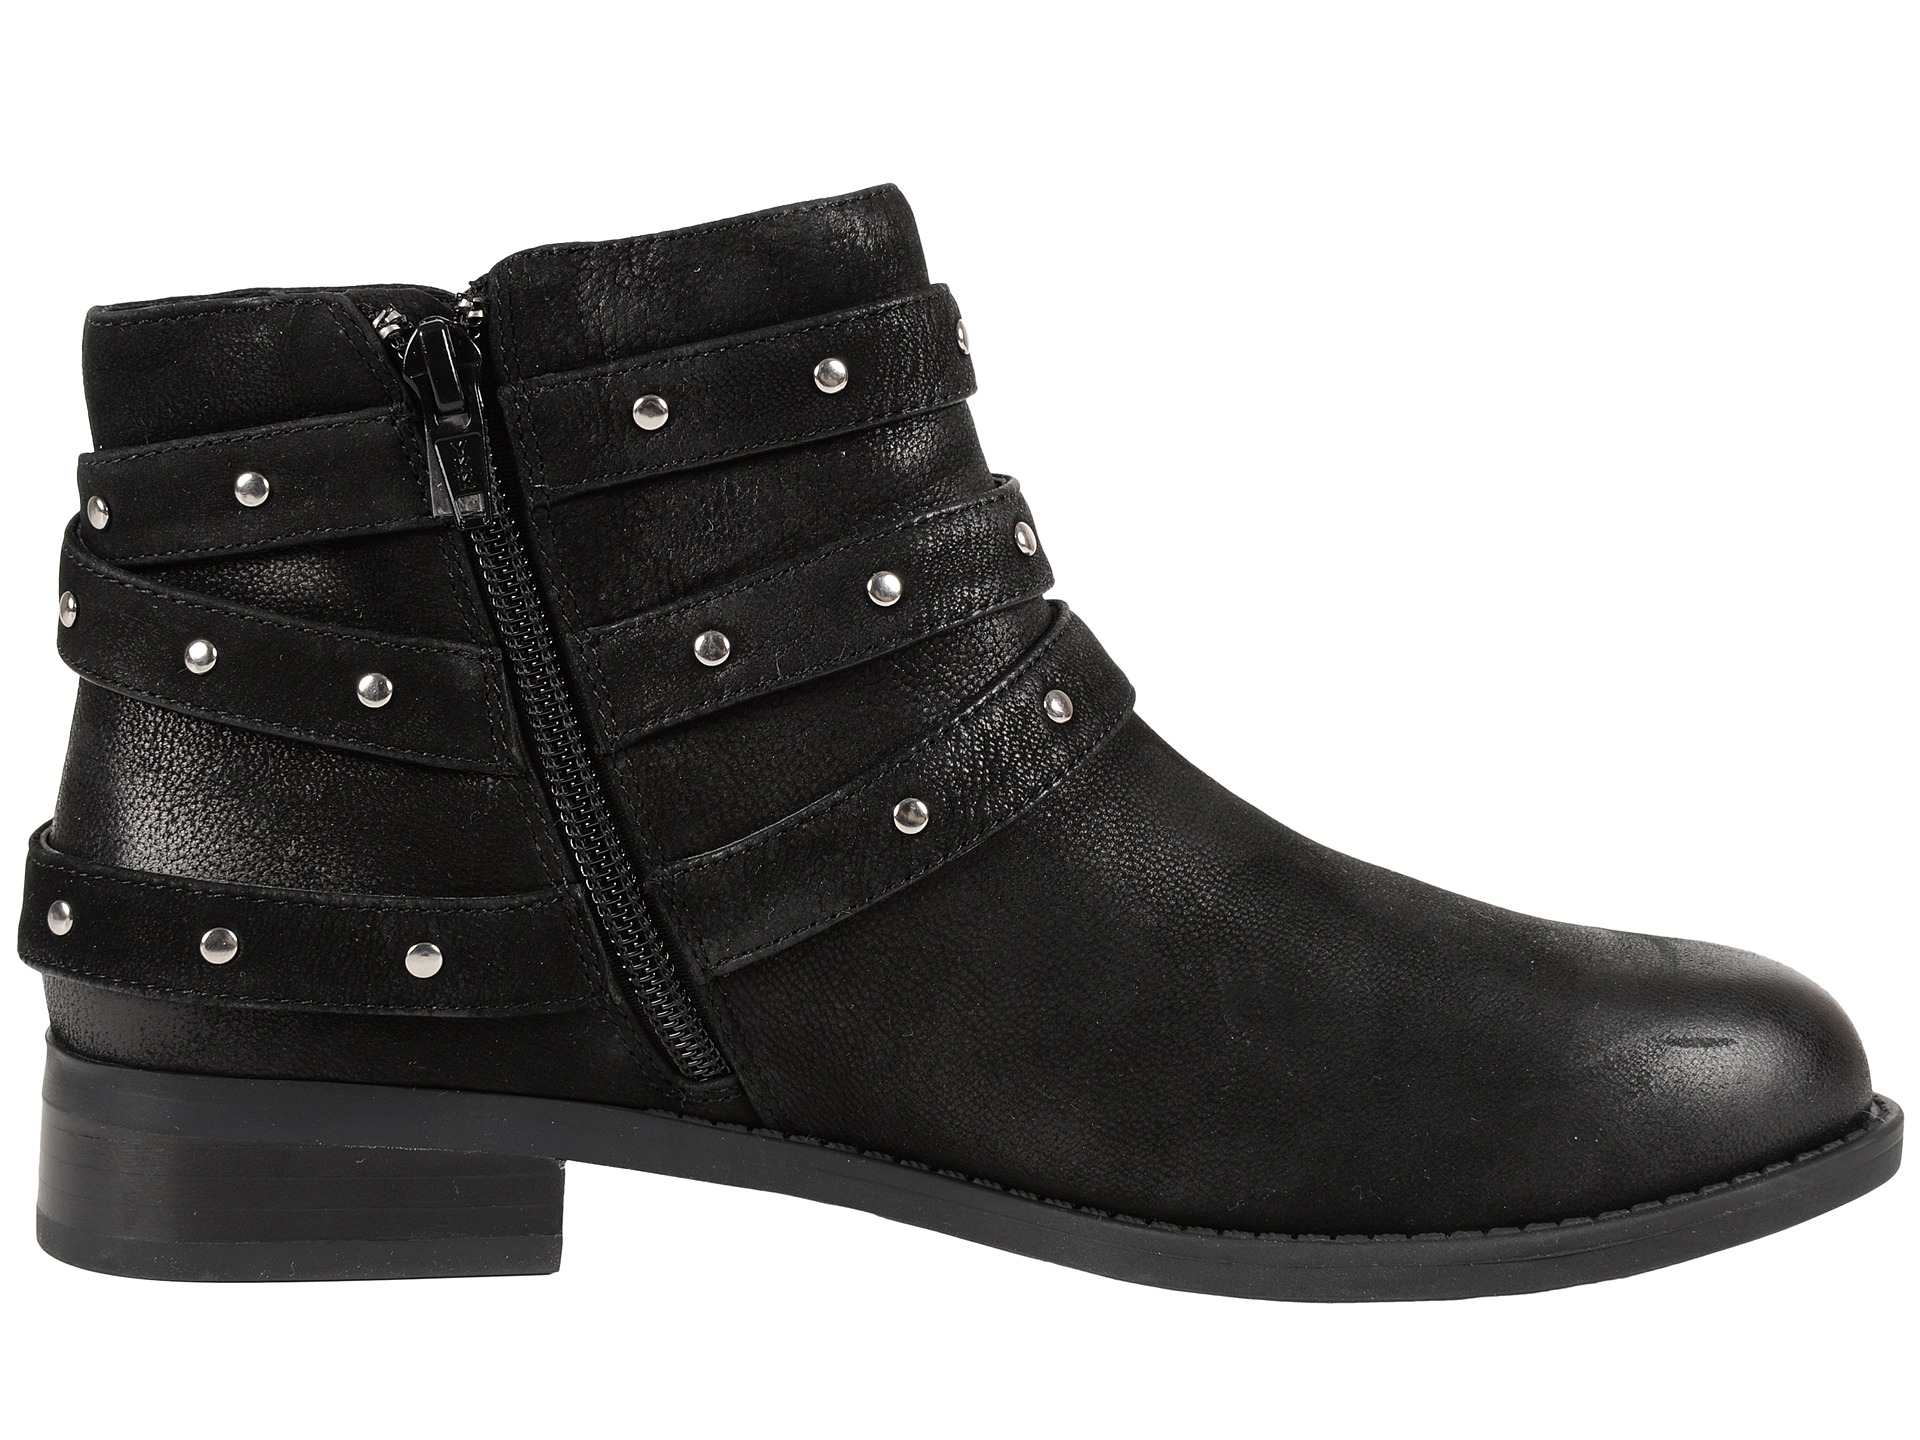 VIONIC Country Lona Ankle Boot Black - Zappos.com Free Shipping BOTH Ways